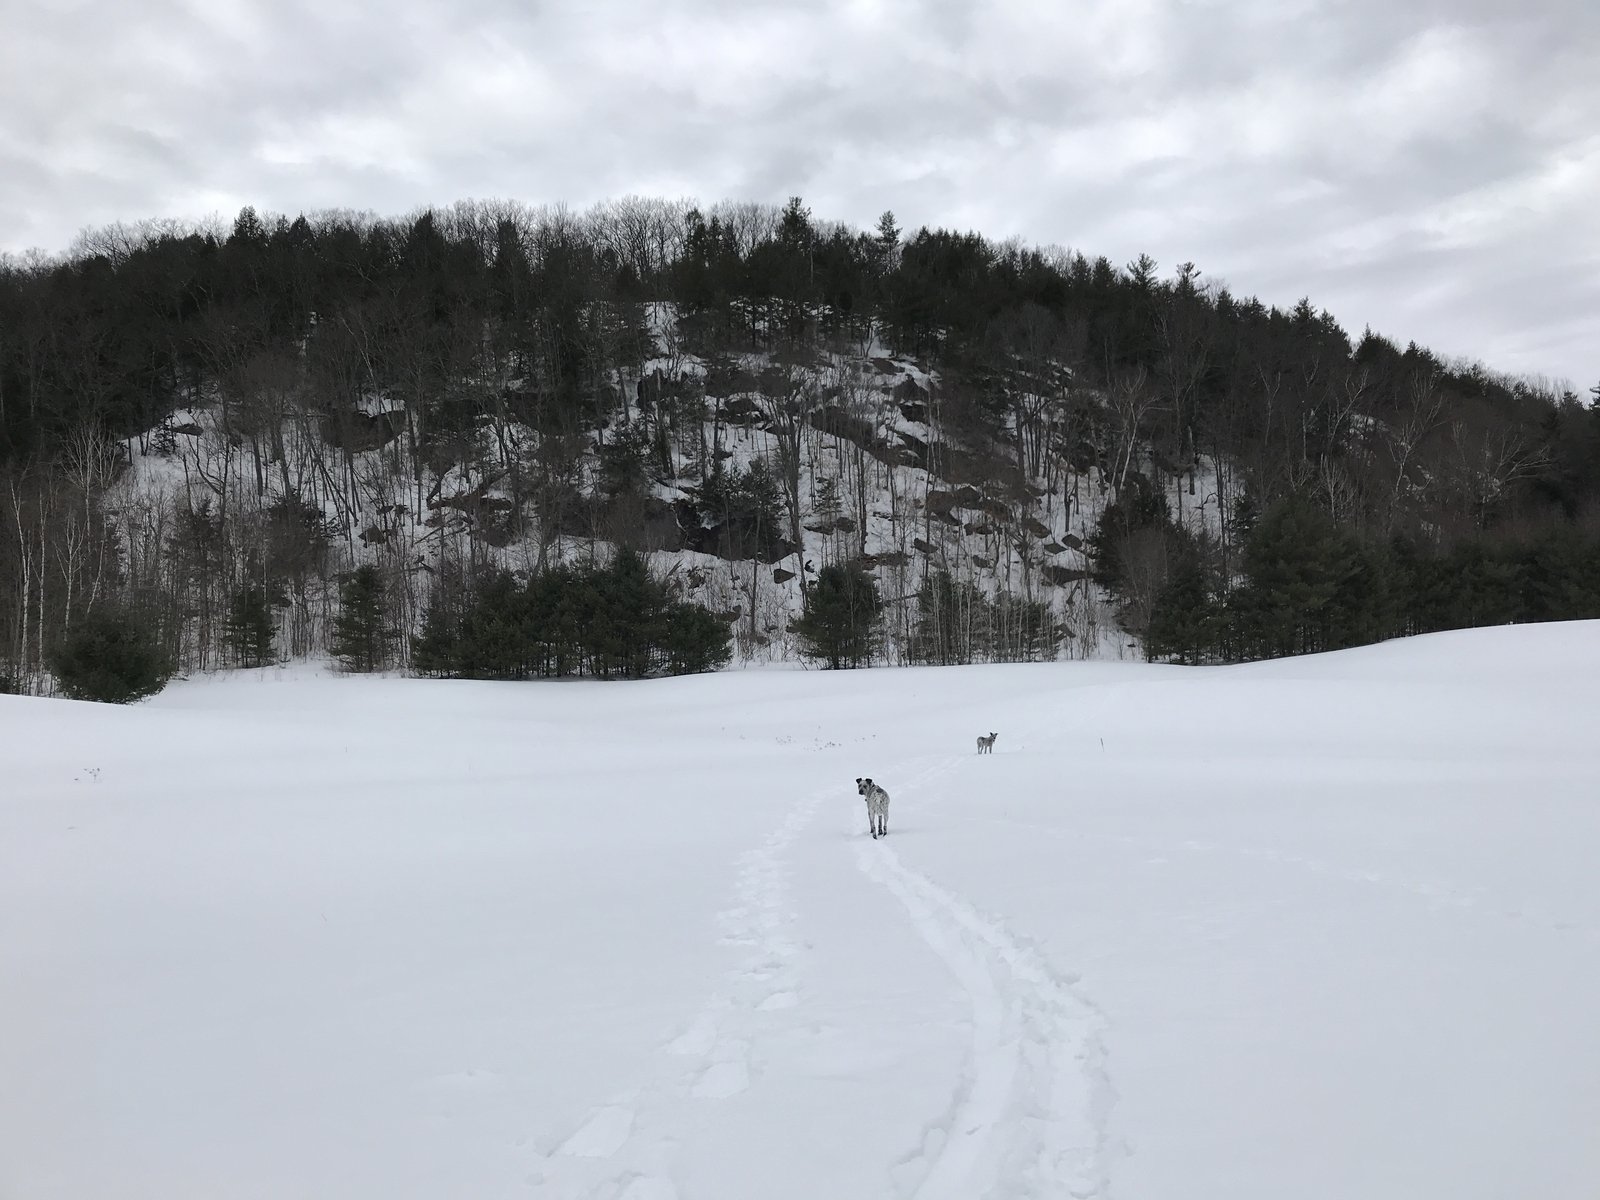 Went on a little hike/ ski with the pups today. 